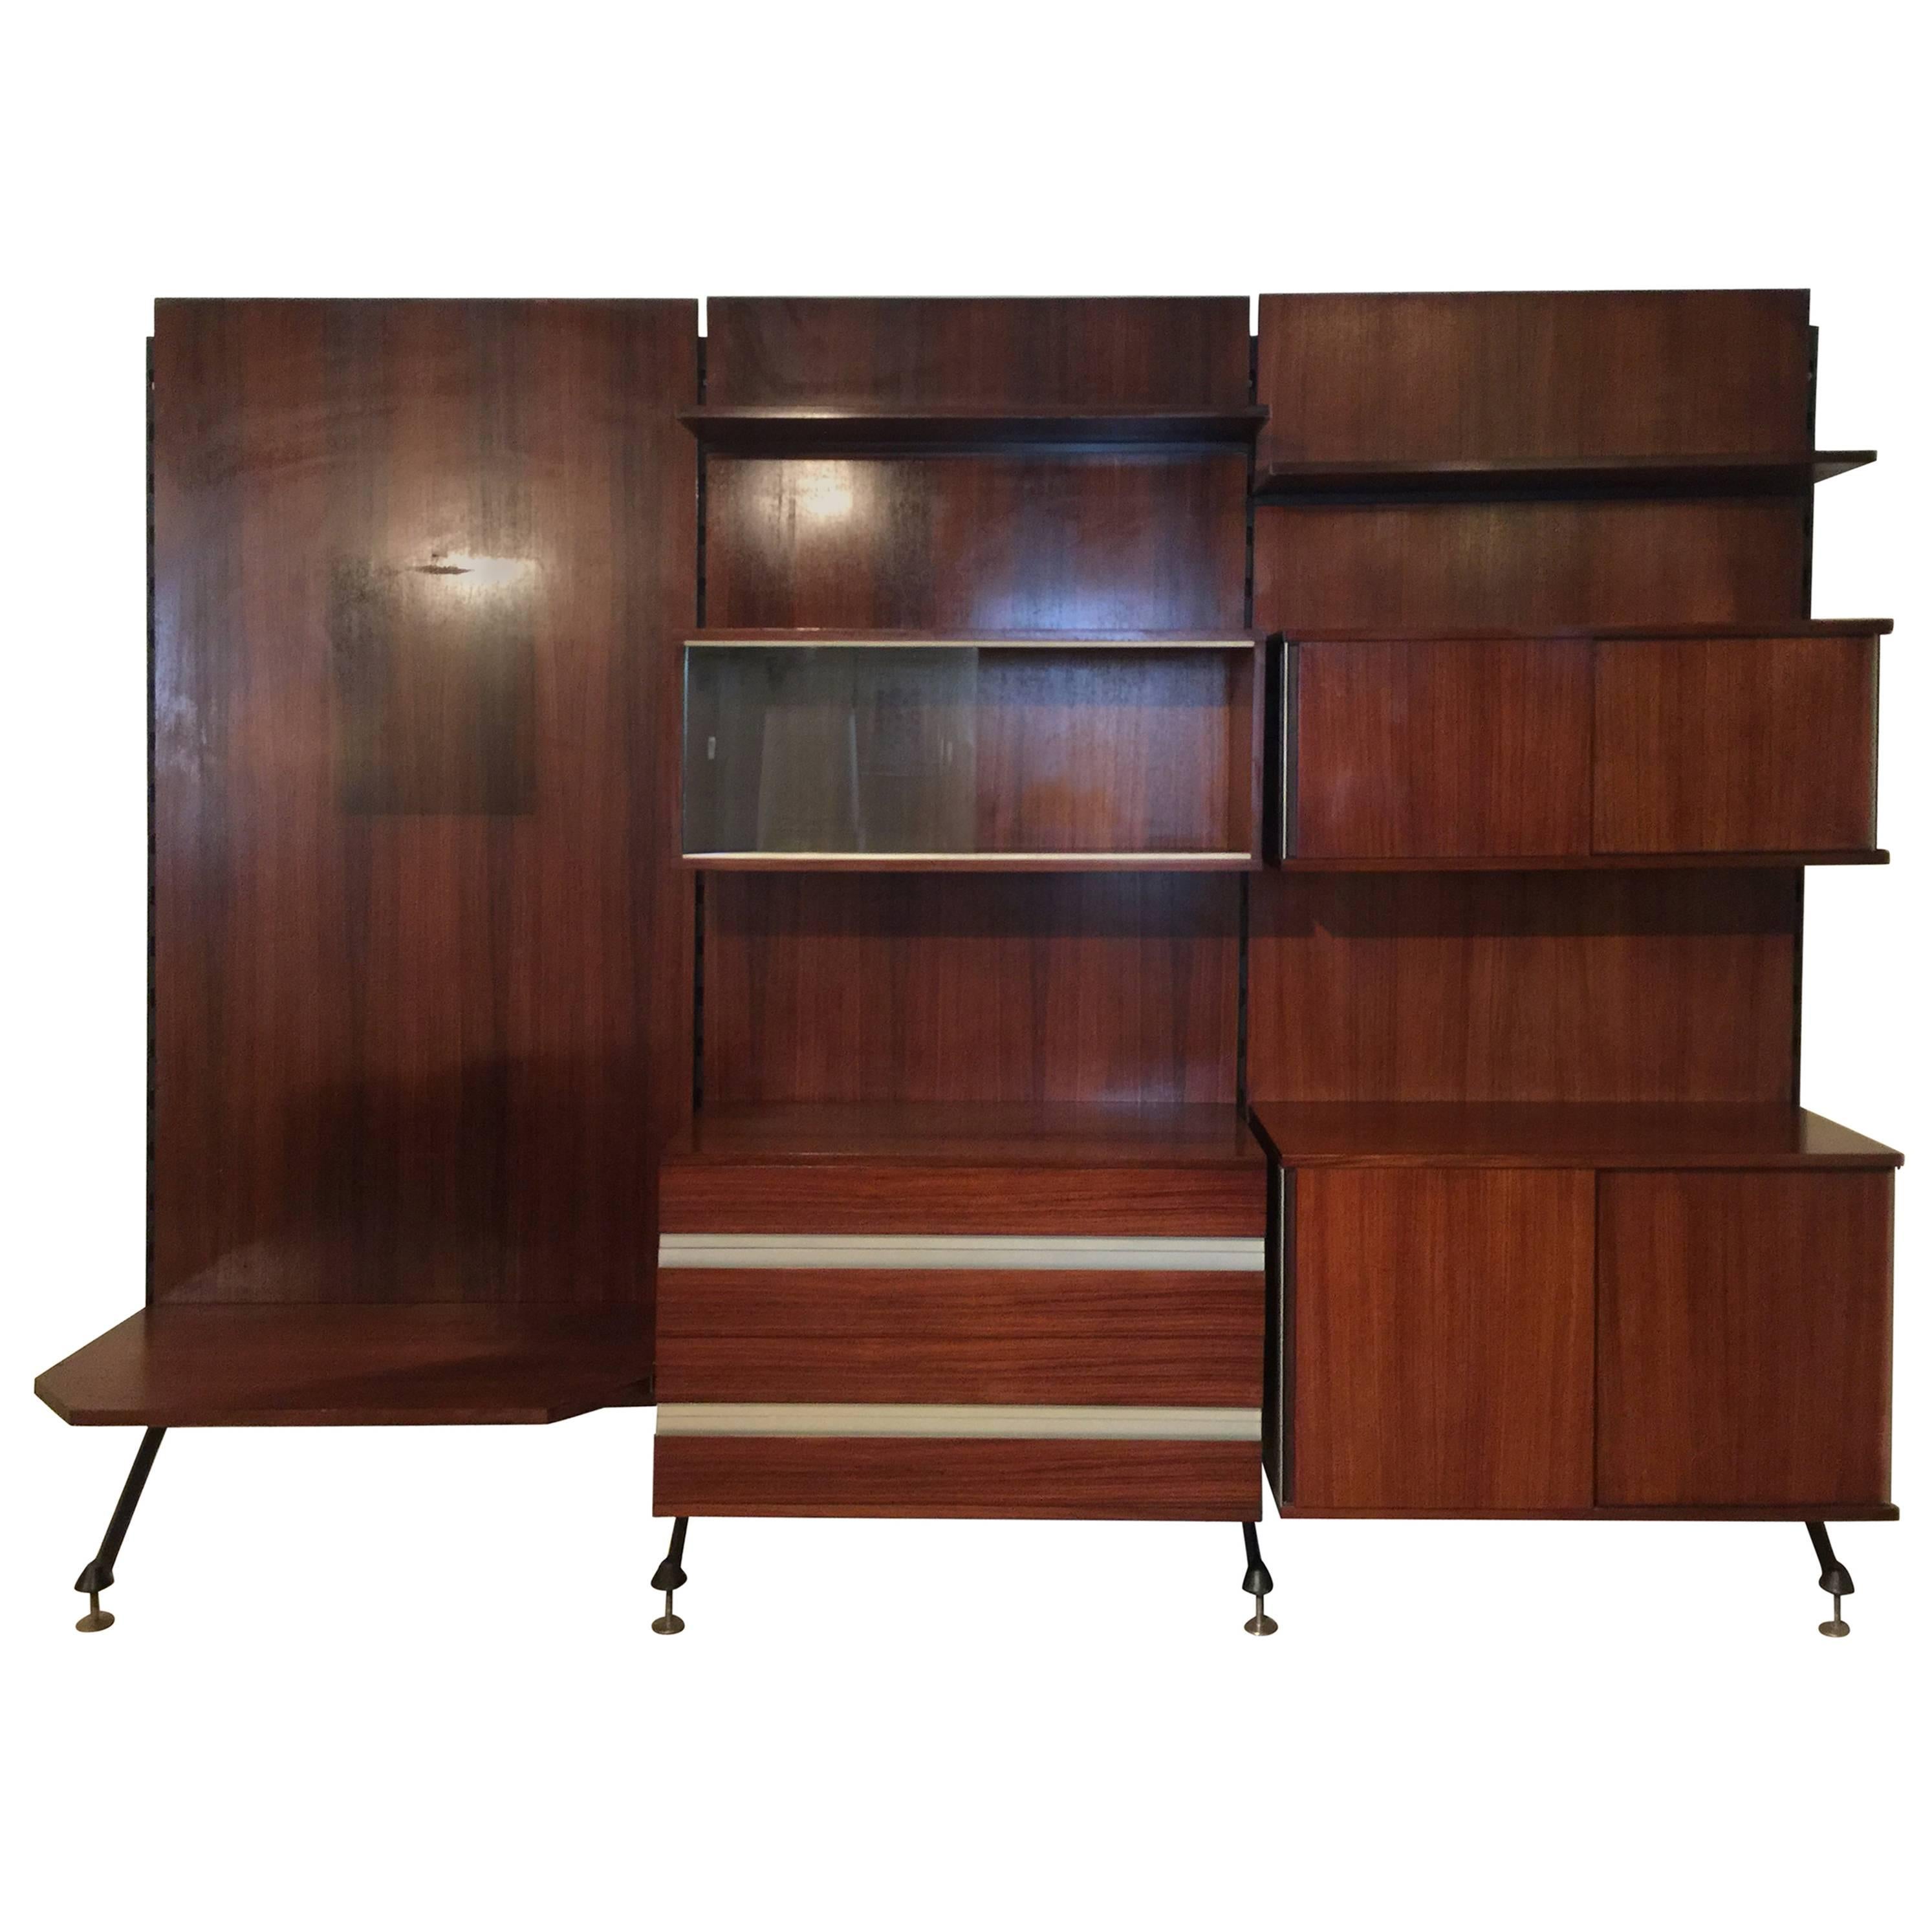 Urio Three-Section Bookcase by Ico Parisi for MIM, Roma